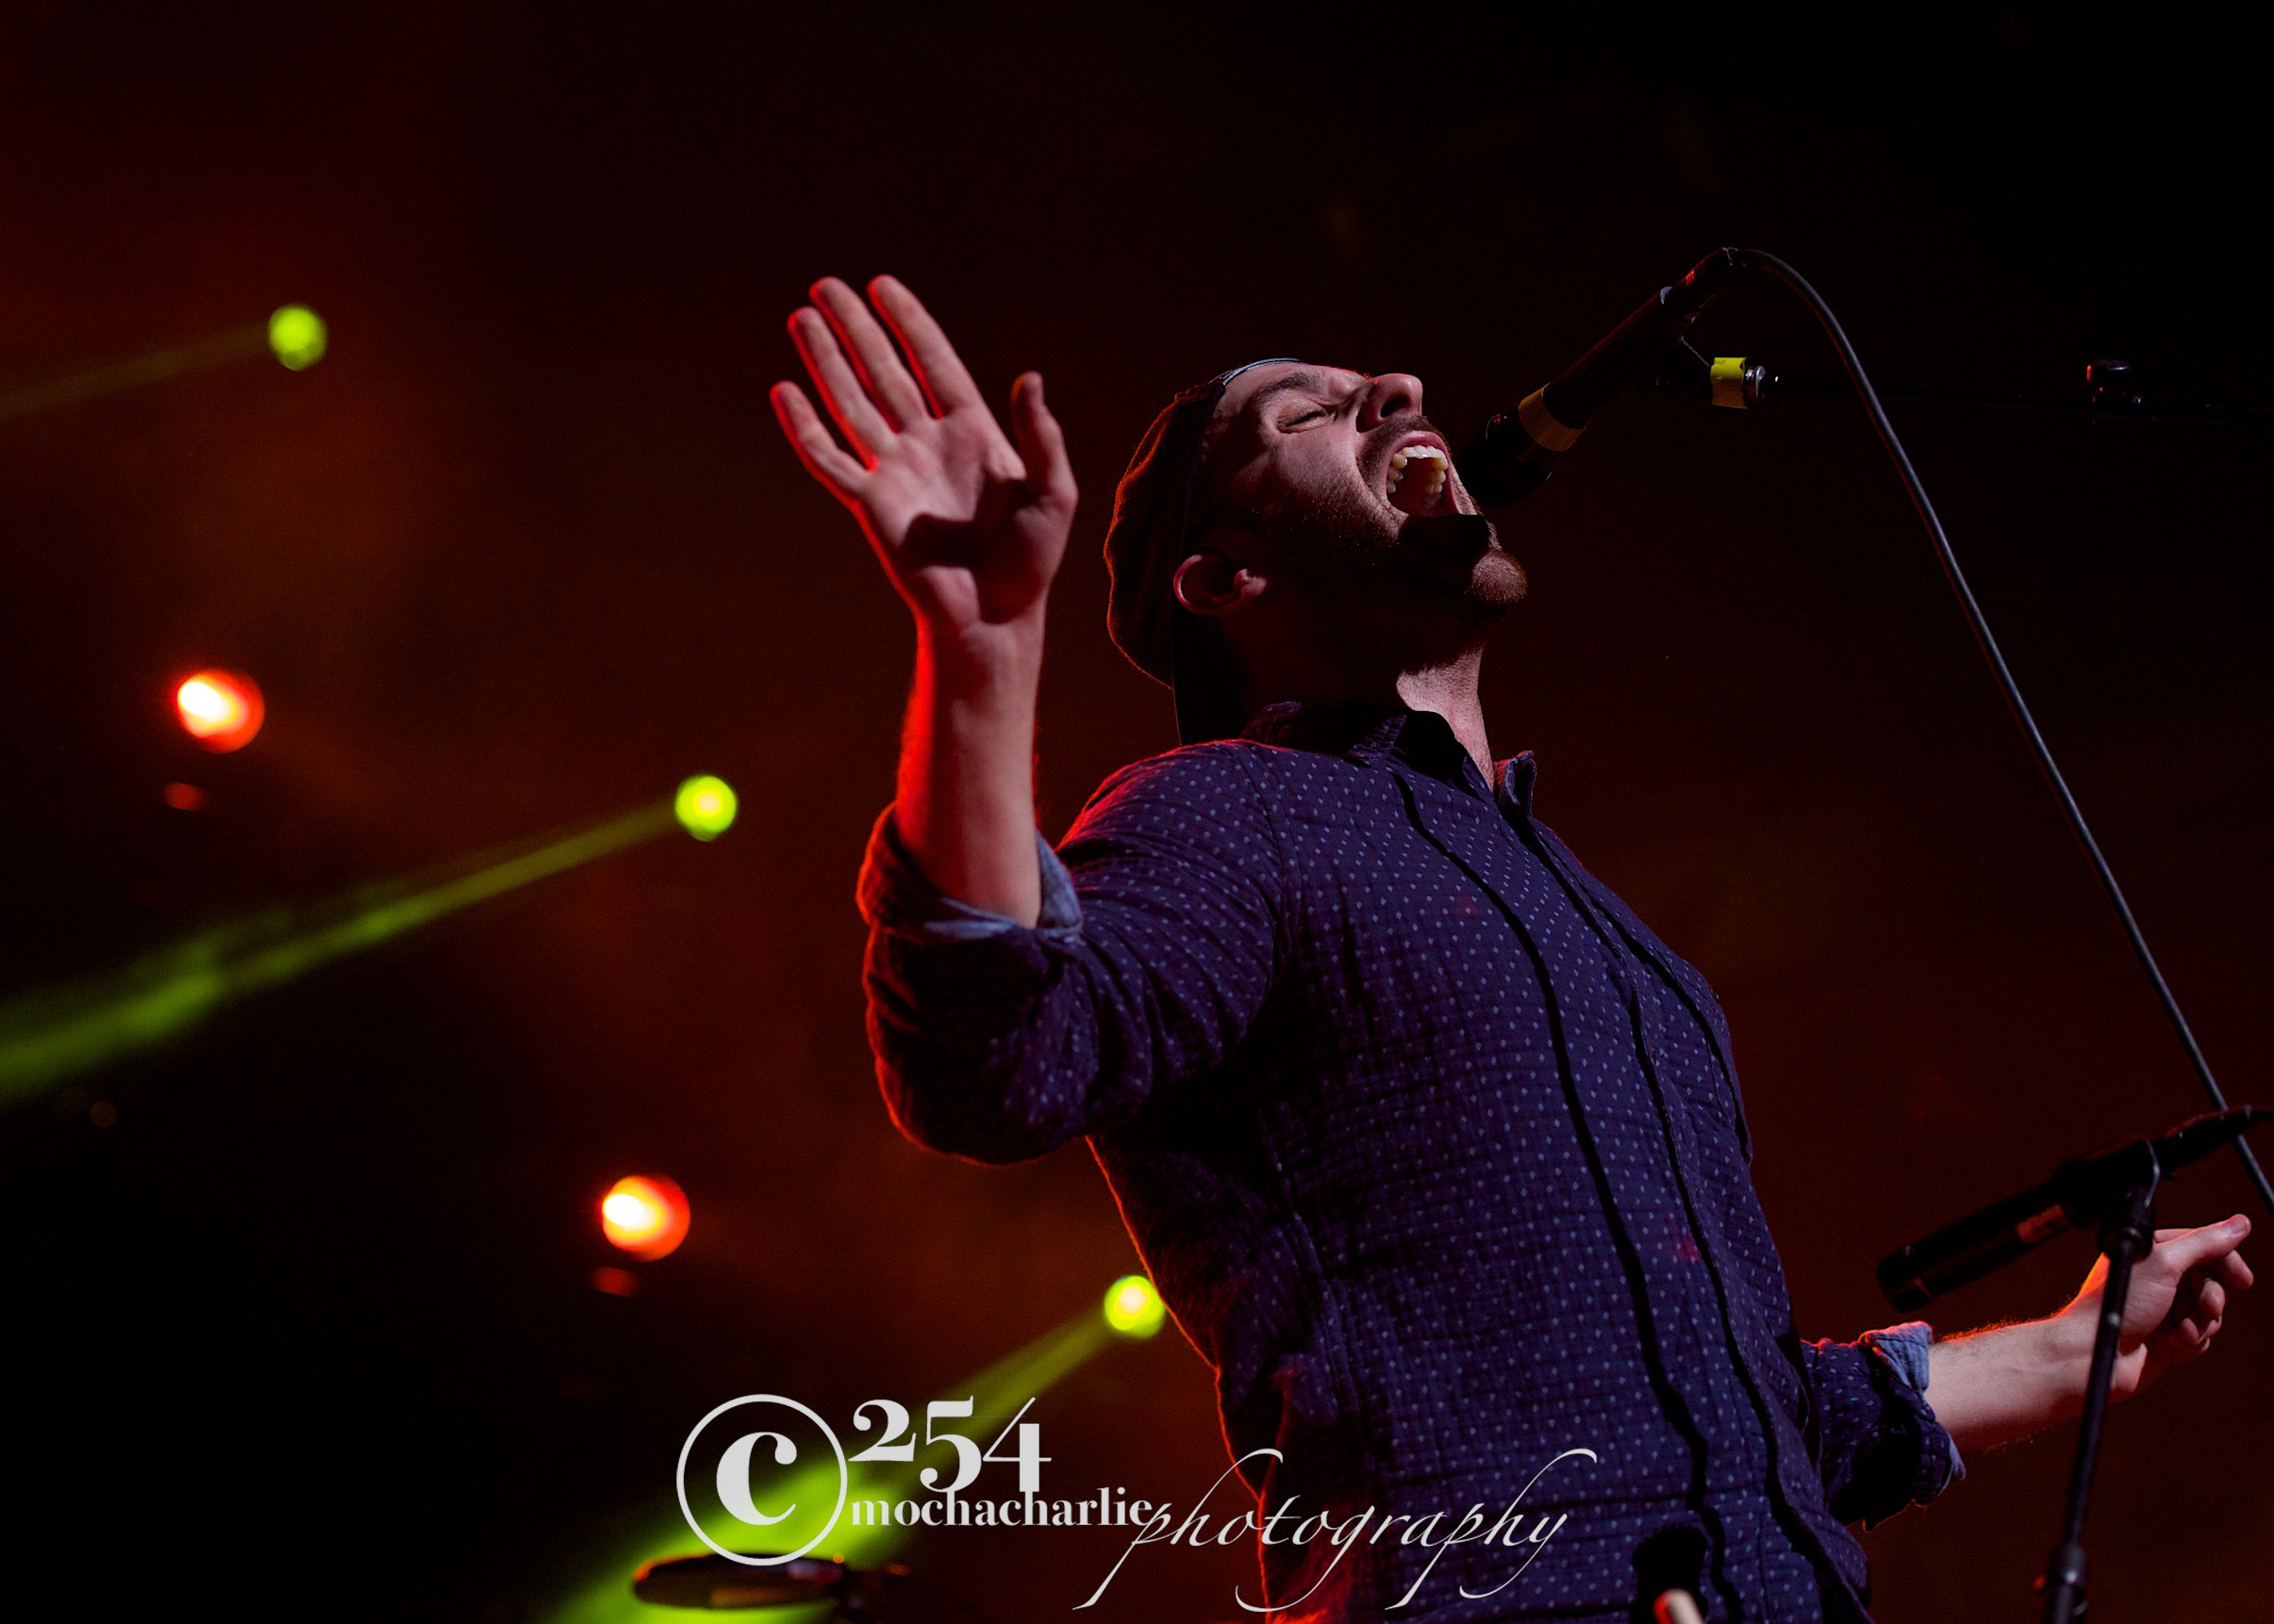 Imagine Dragons, X Ambassadors The Naked And Famous @ Key Arena (Photo by Mocha Charlie)